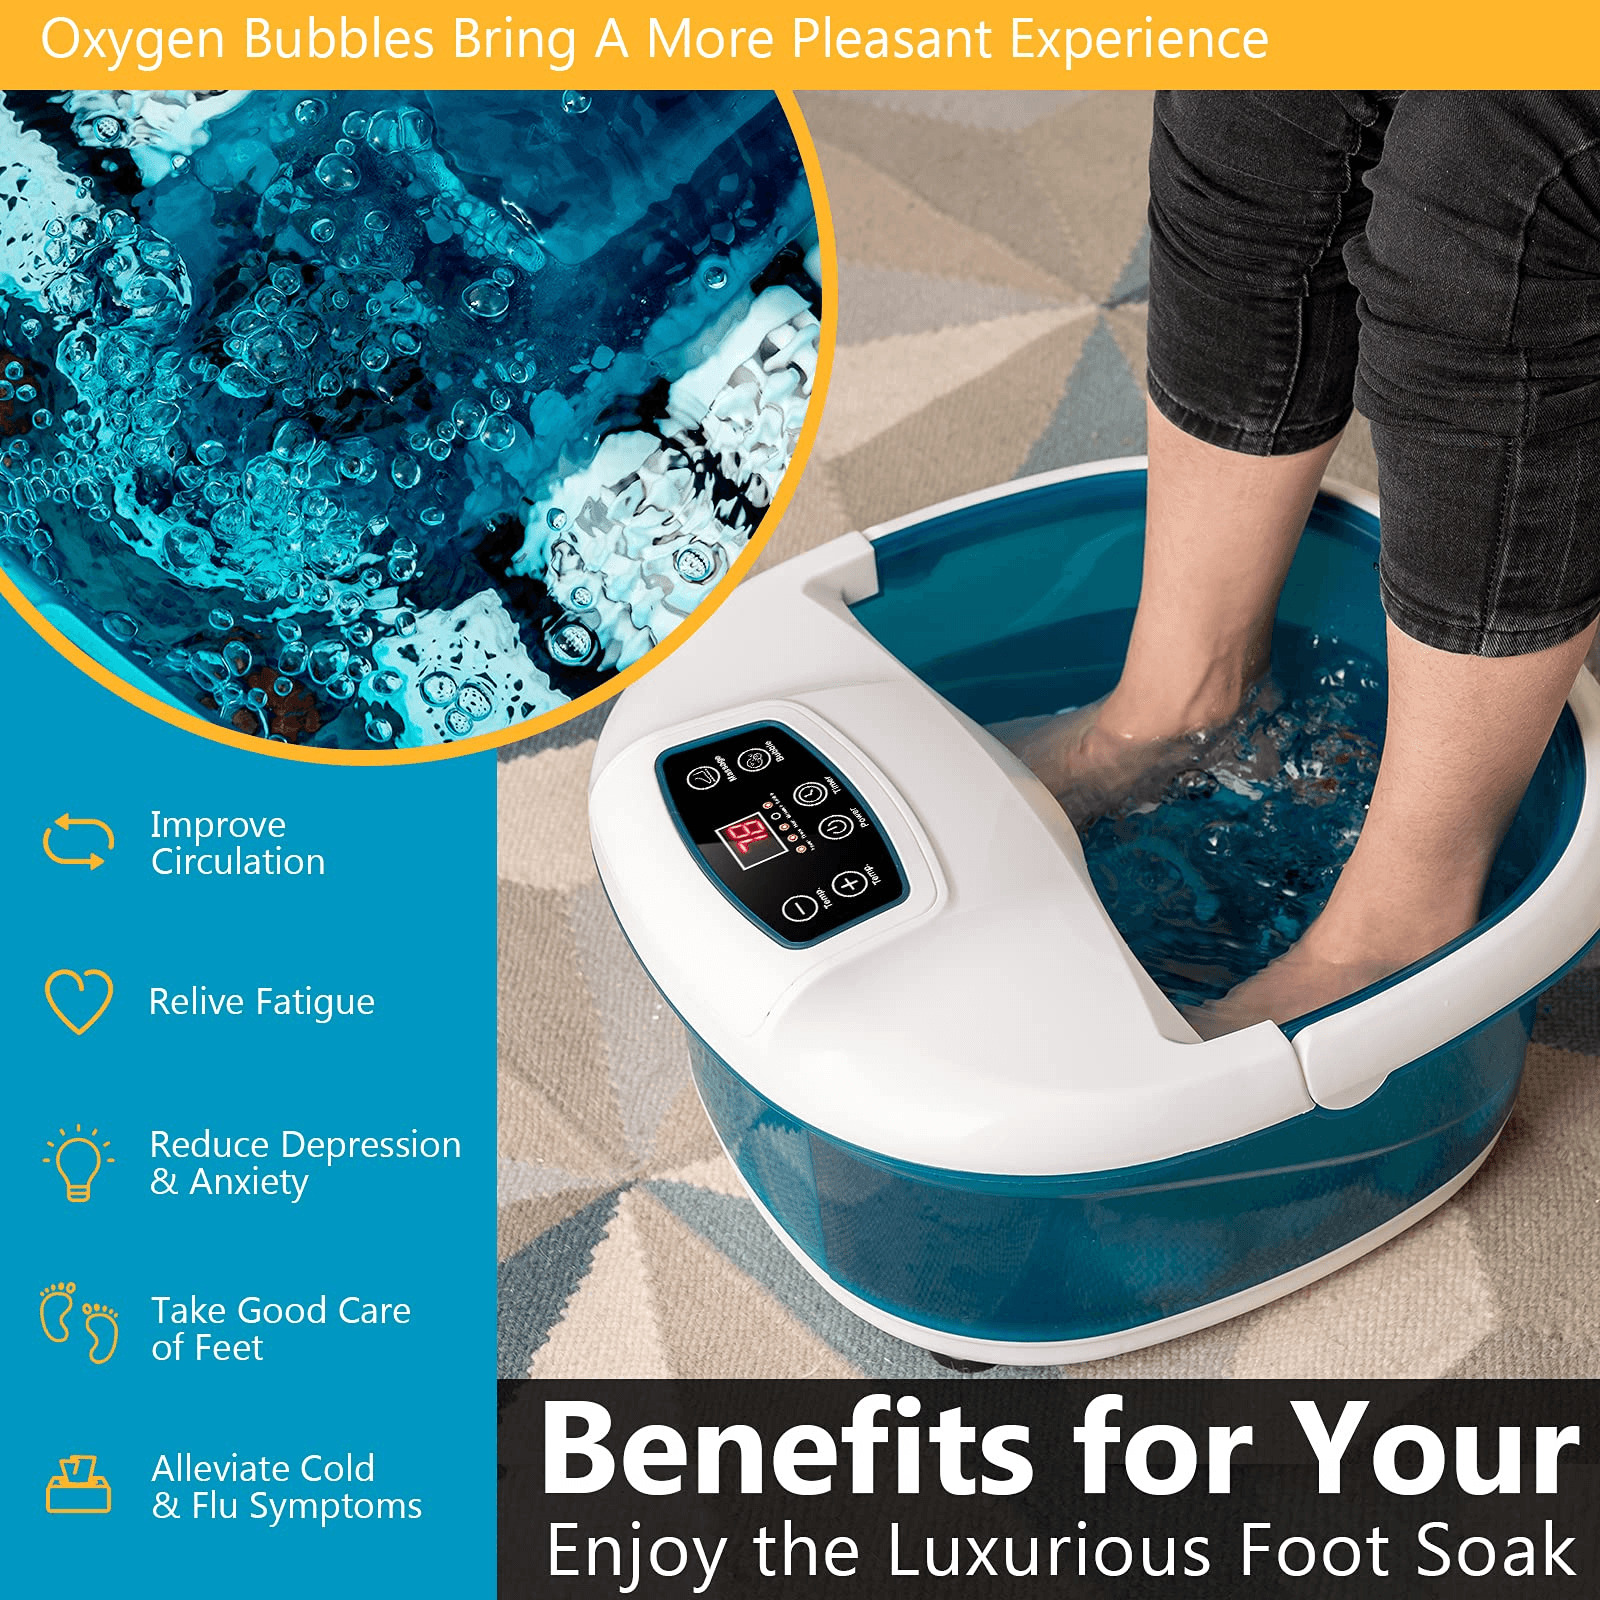 Giantex Foot Spa Bath Massager with Heat Bubbles, 6 Motorized Massage Rollers, Fast Heating, Red Light, Adjustable Temperature & Time (Blue/White) - Giantexus